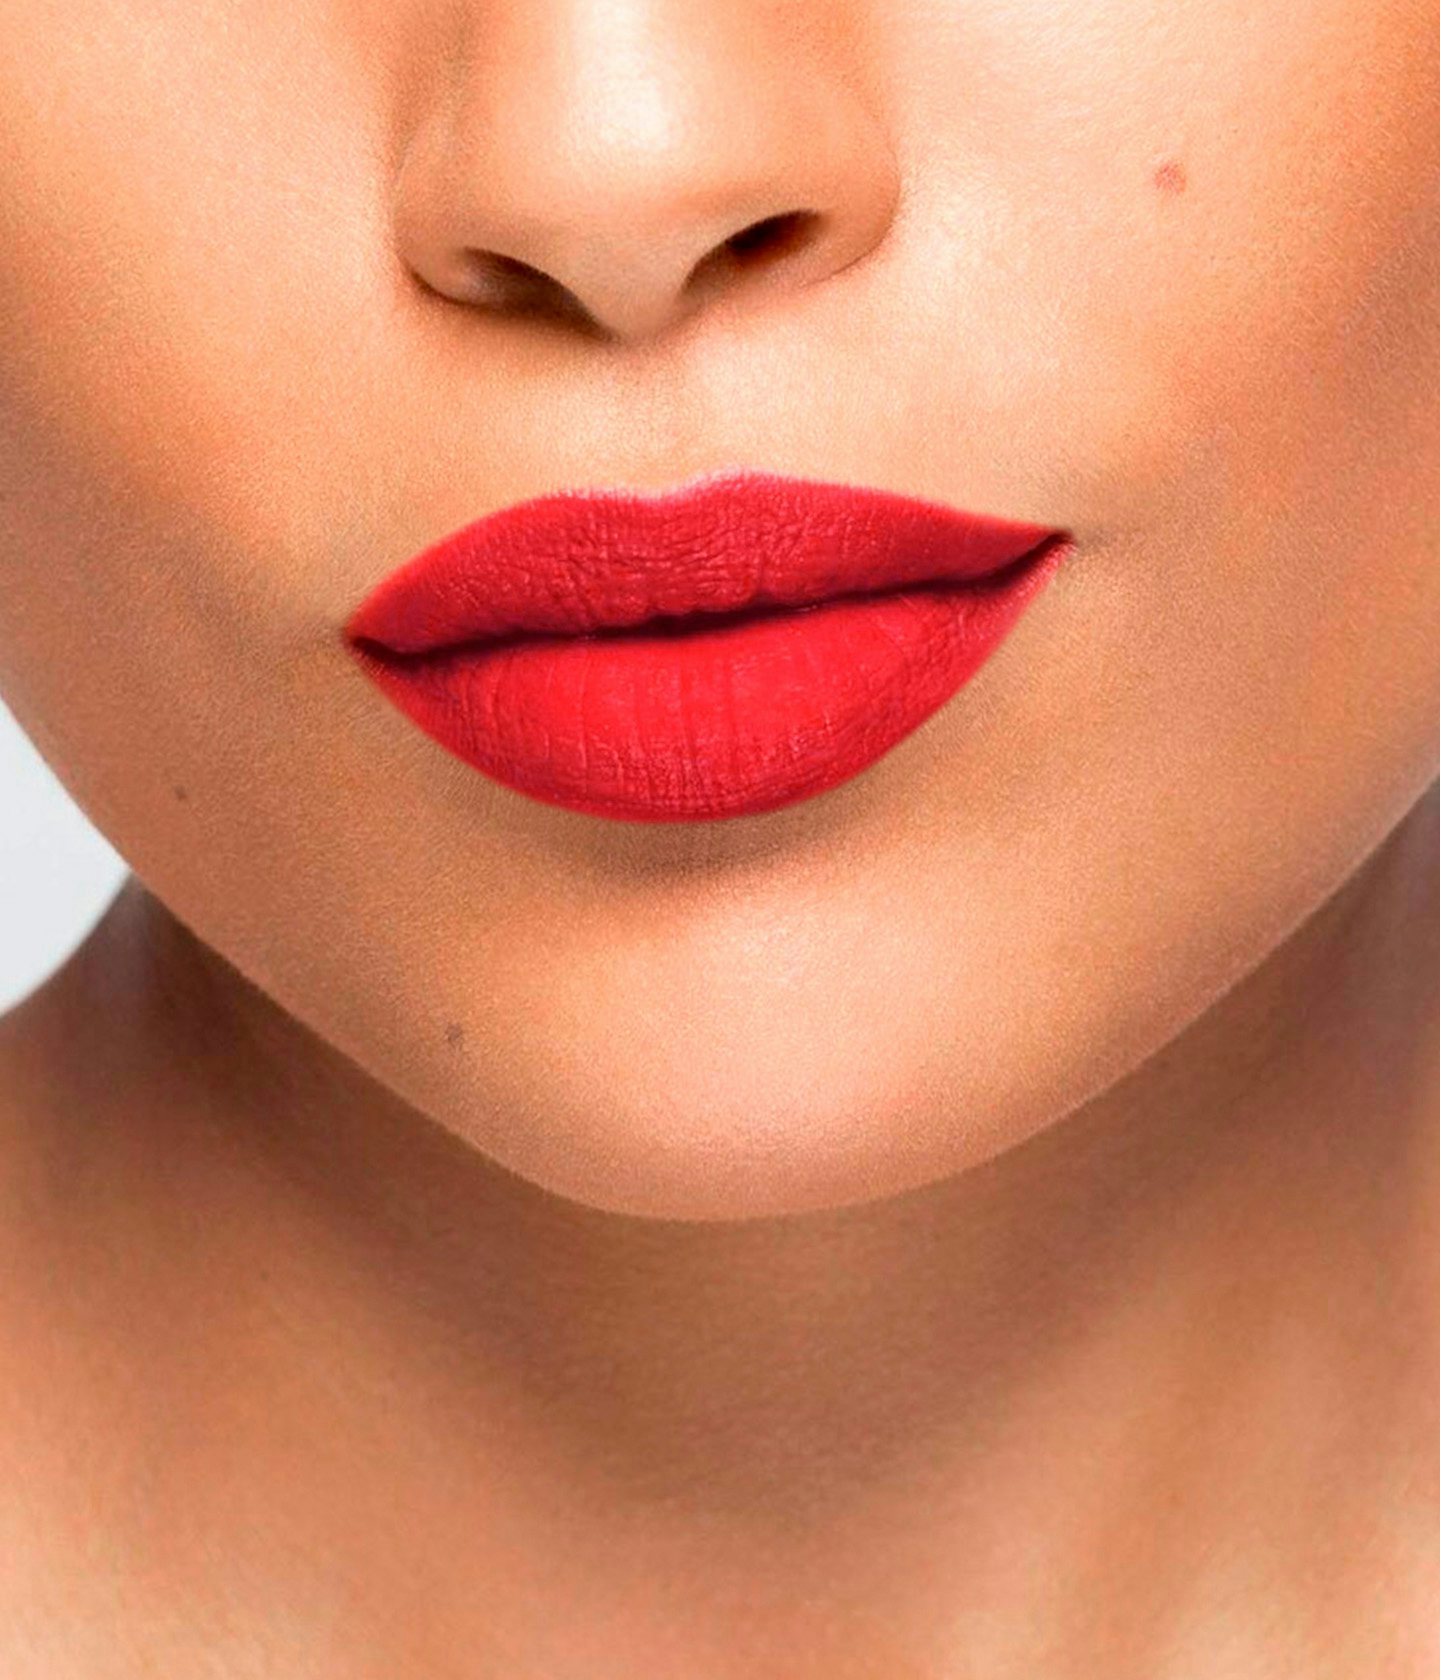 La bouche rouge Le Rouge Montaigne lipstick shade on the lips of a medium skin model